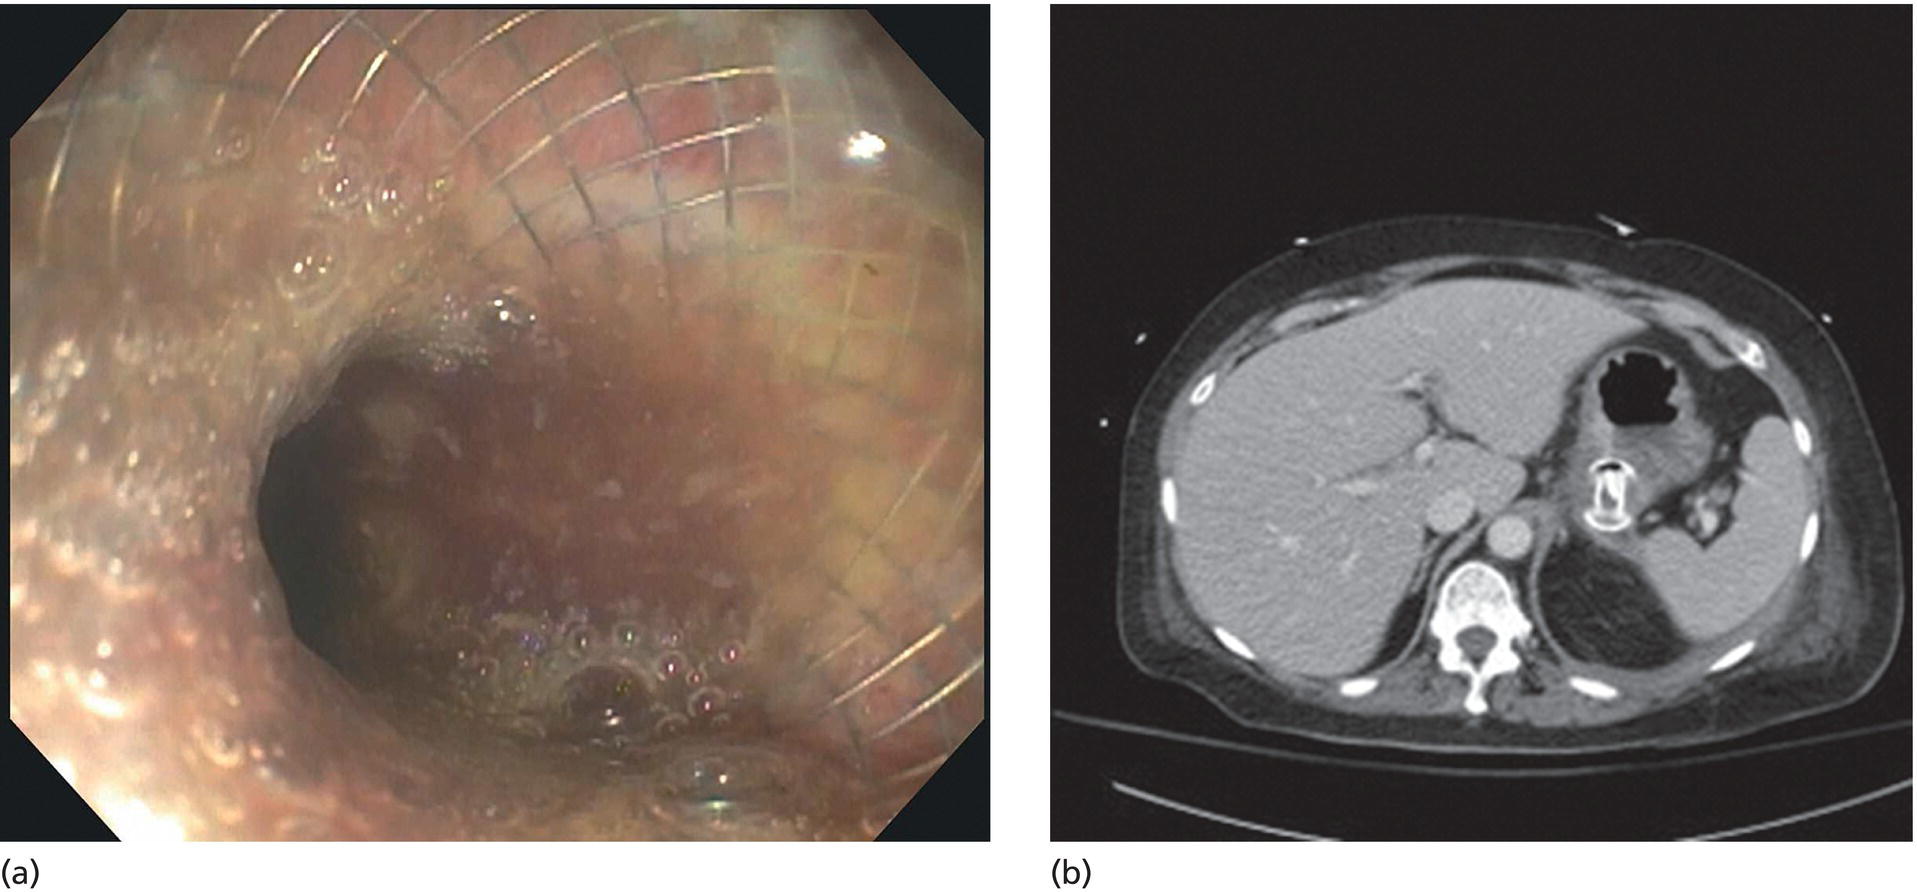 Photos depict (a) Endoscopic view of the proximal flange of the LAMS in the stomach lumen with drainage of cyst contents. (b) CT of the abdomen demonstrating the LAMS placed for drainage of pseudocyst.